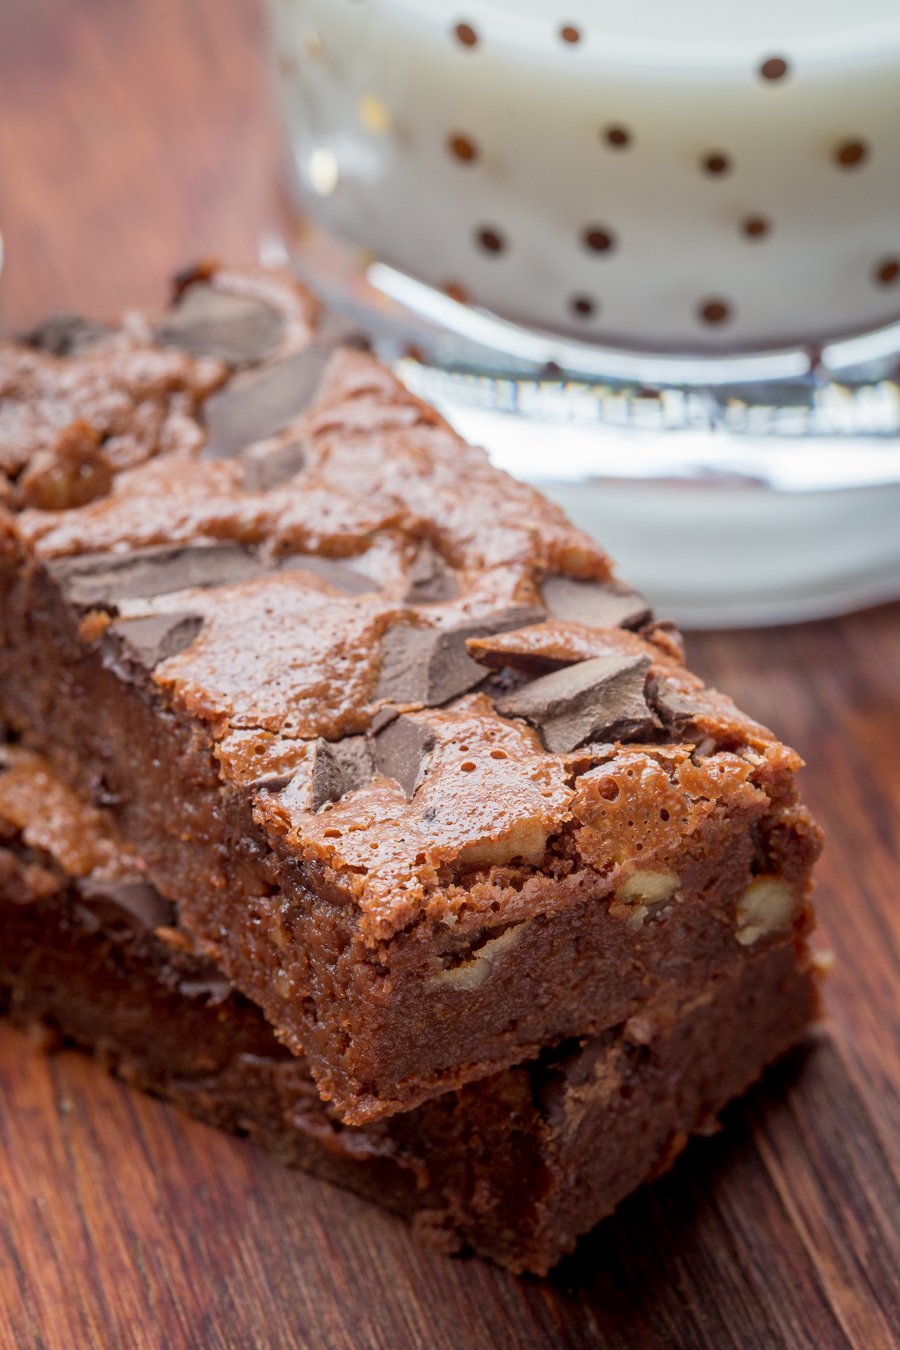 Step Away, Starbucks Brownies! - you've got nothing on this Chocolate Walnut Brownie that's fudgy, yet light with a sprinkle of walnuts to balance out the flavors. by Let the Baking Begin!